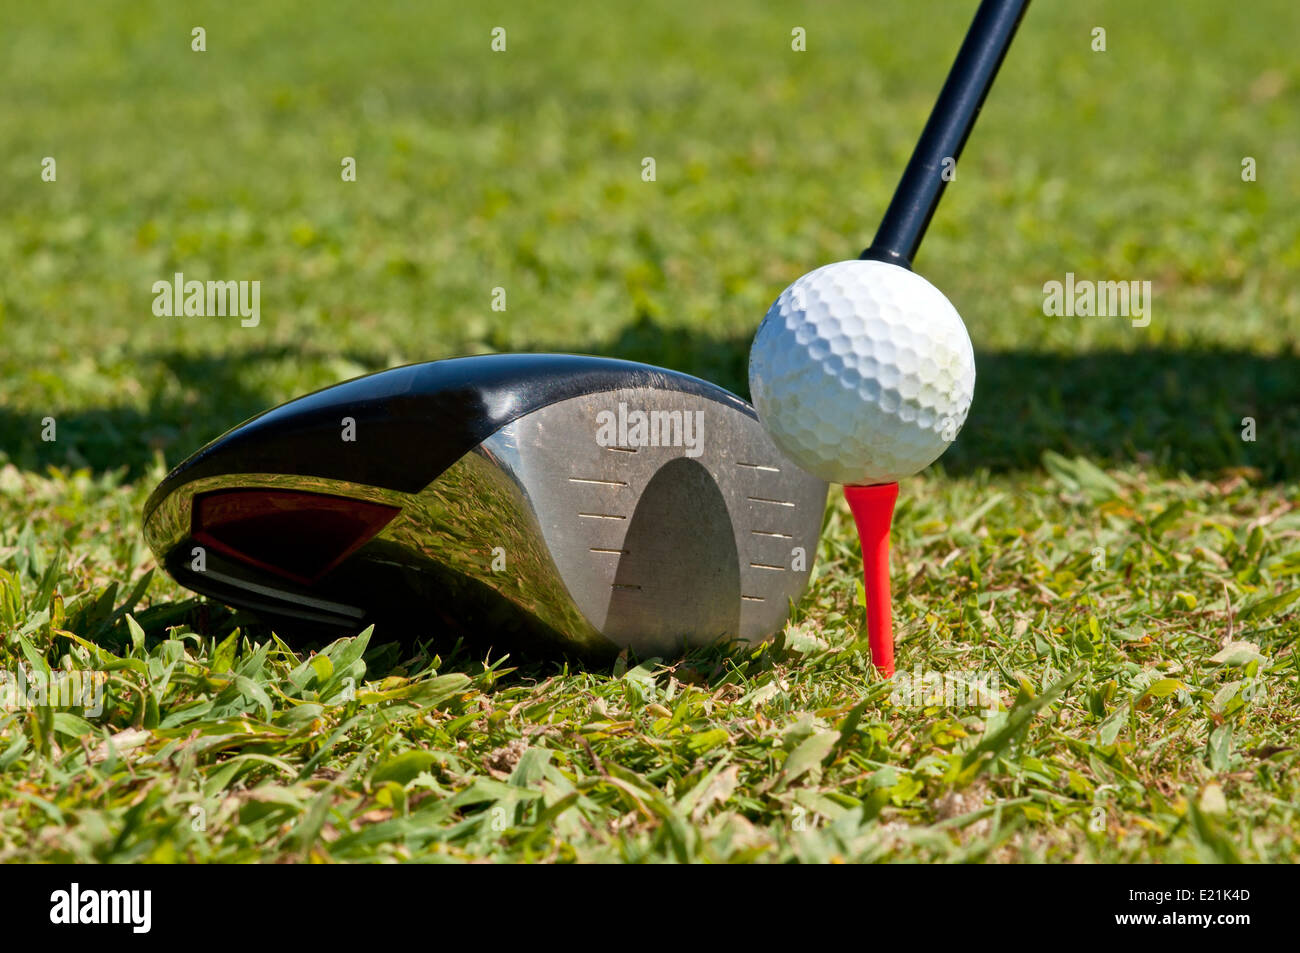 Golf ball and driver Stock Photo